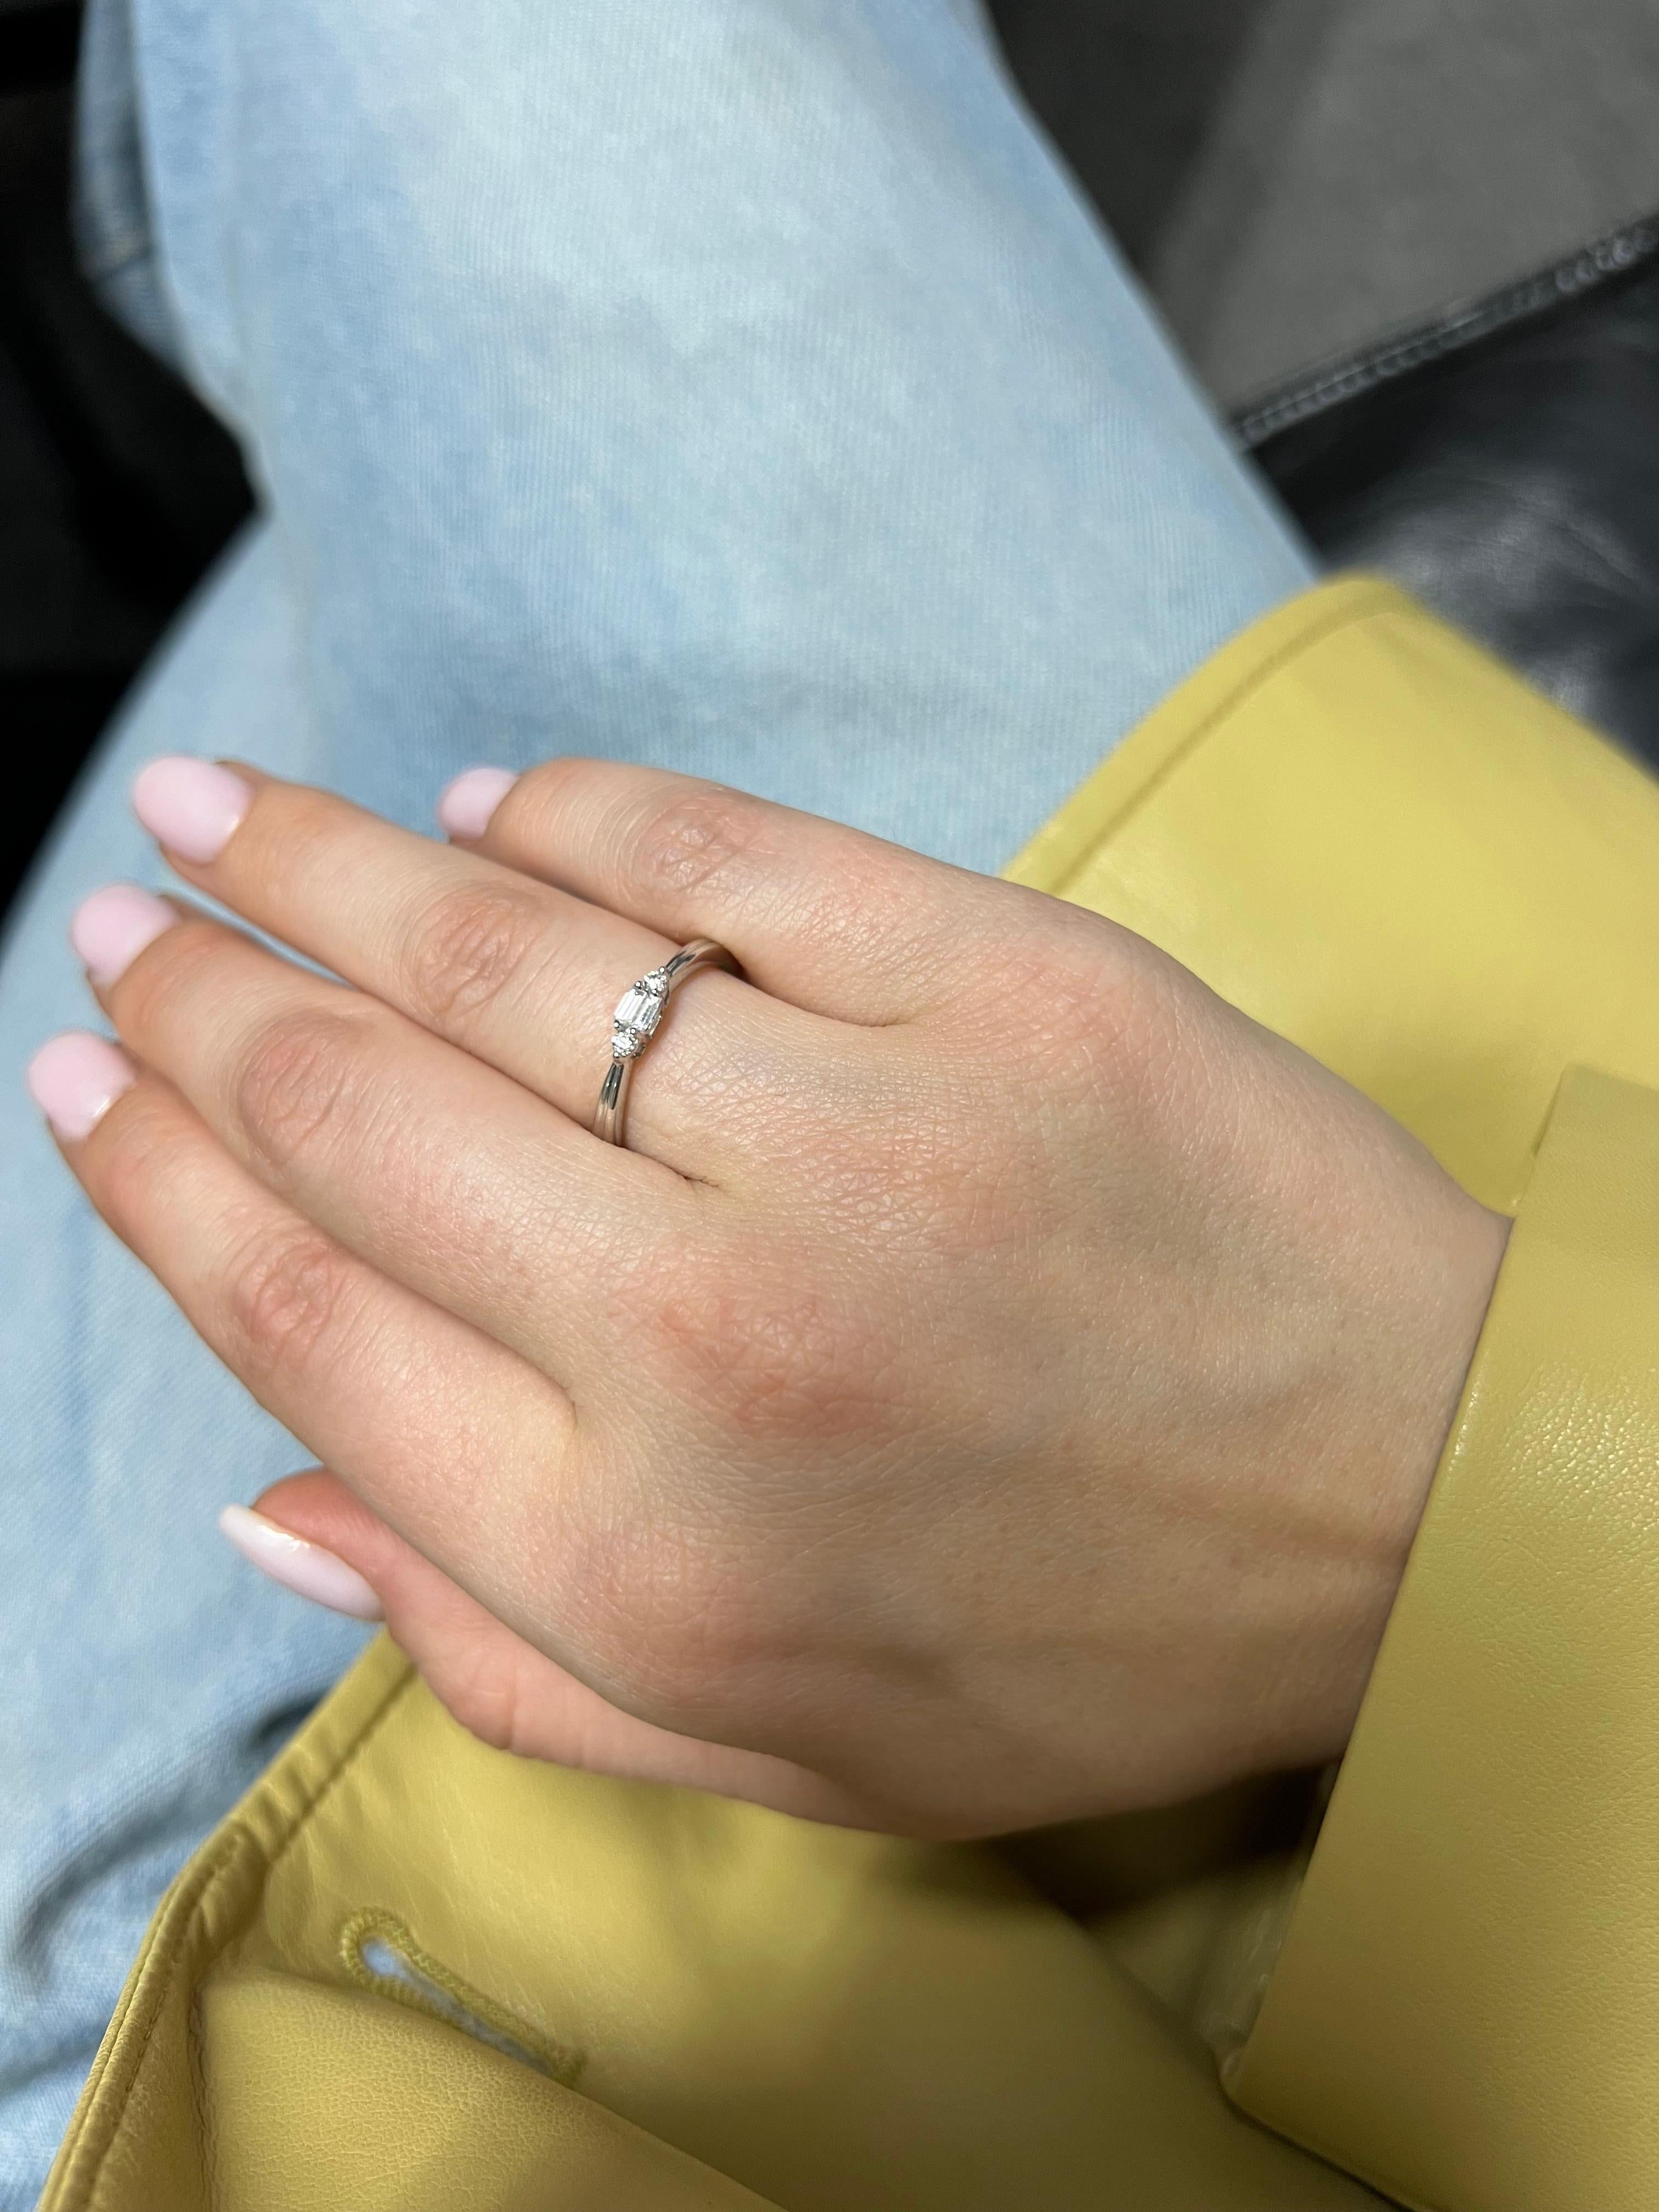 At the heart of the ring lies a stunning baguette diamond, radiating a sleek and modern allure. The baguette diamond, with its elongated shape and pristine clarity, serves as the focal point of the ring, exuding a sense of contemporary